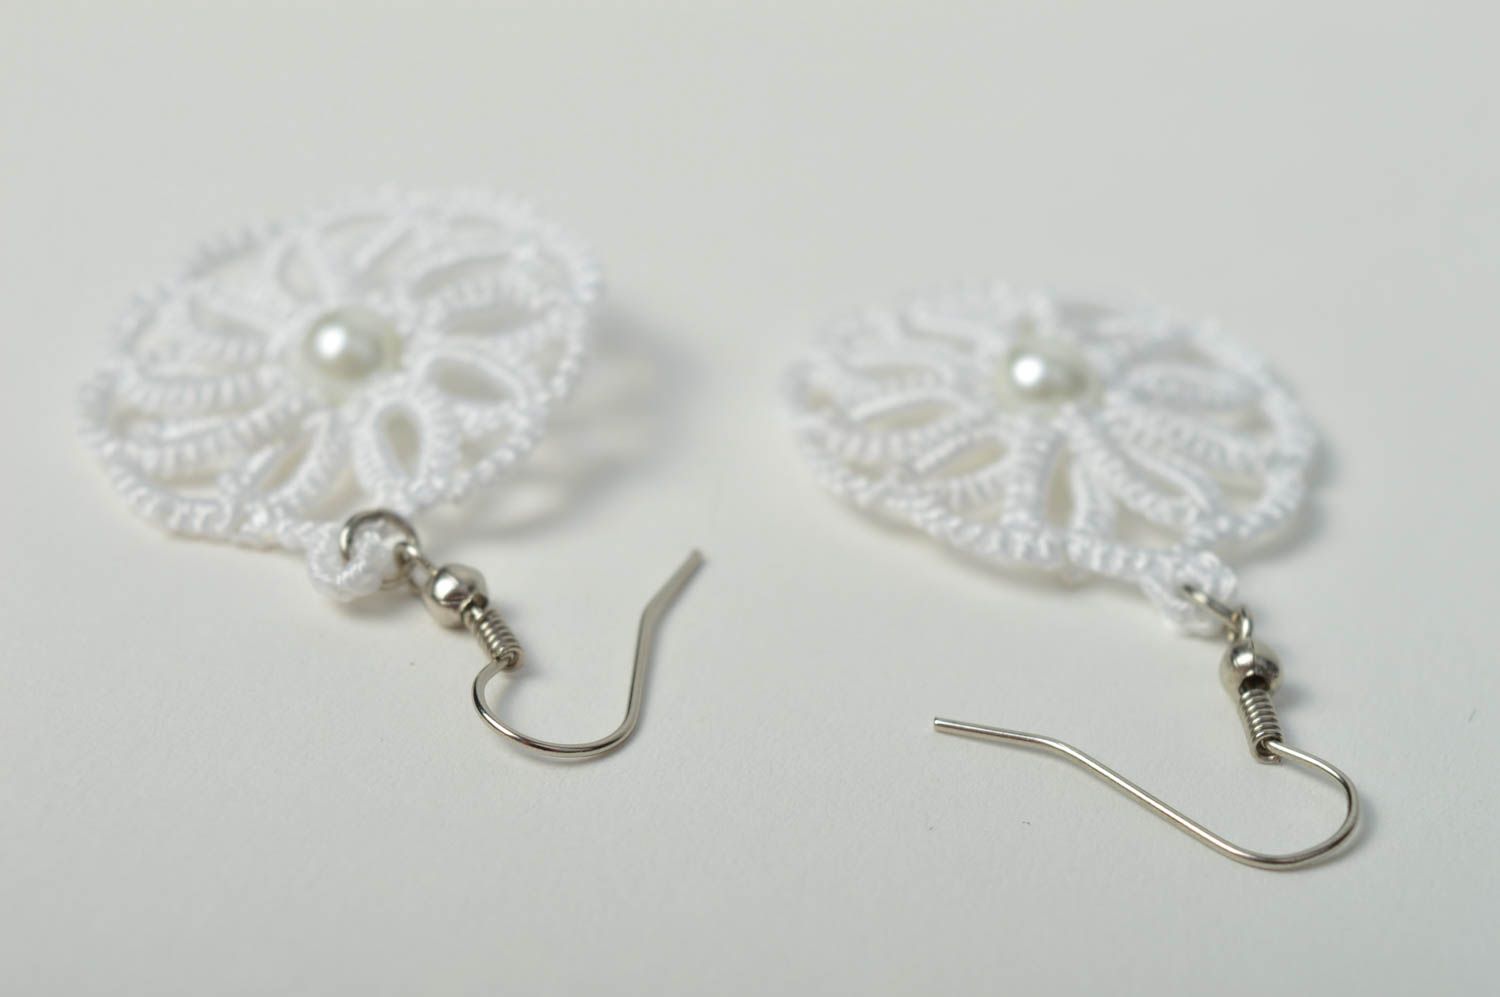 Unusual handmade woven lace earrings textile jewelry designs accessories for her photo 3